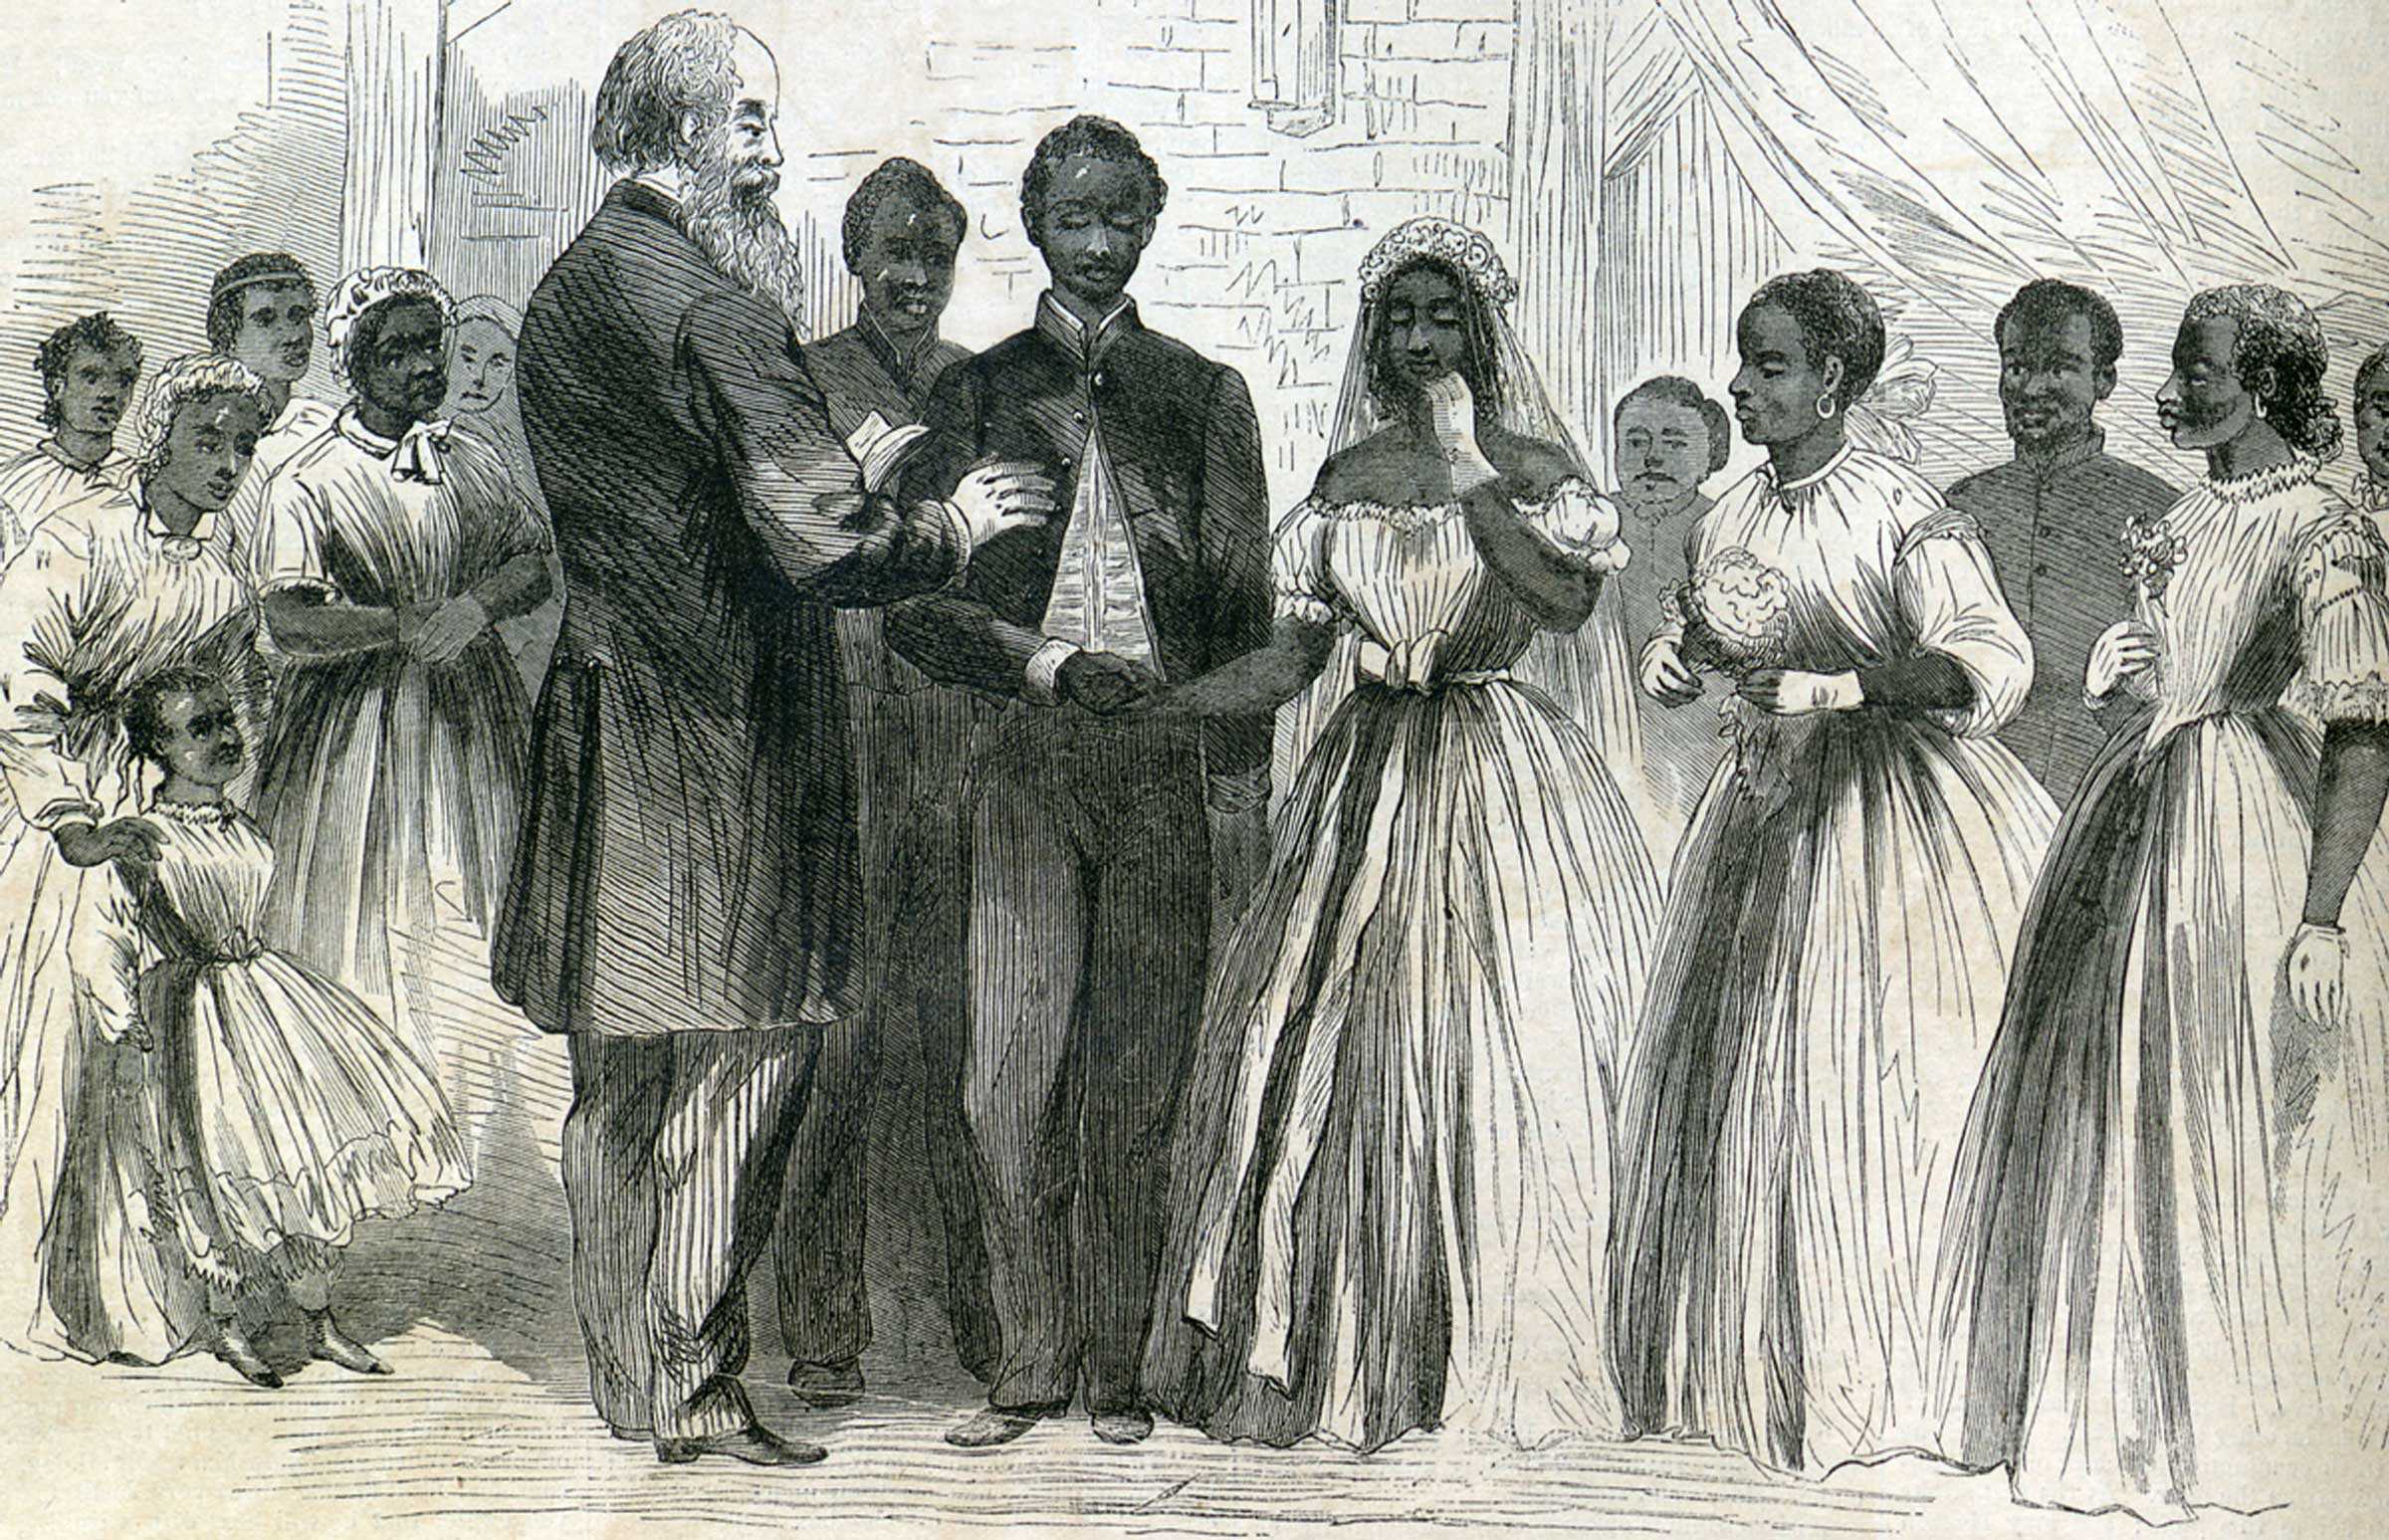 An illustration of a marriage ceremony with the bride and groom and their bridal party.